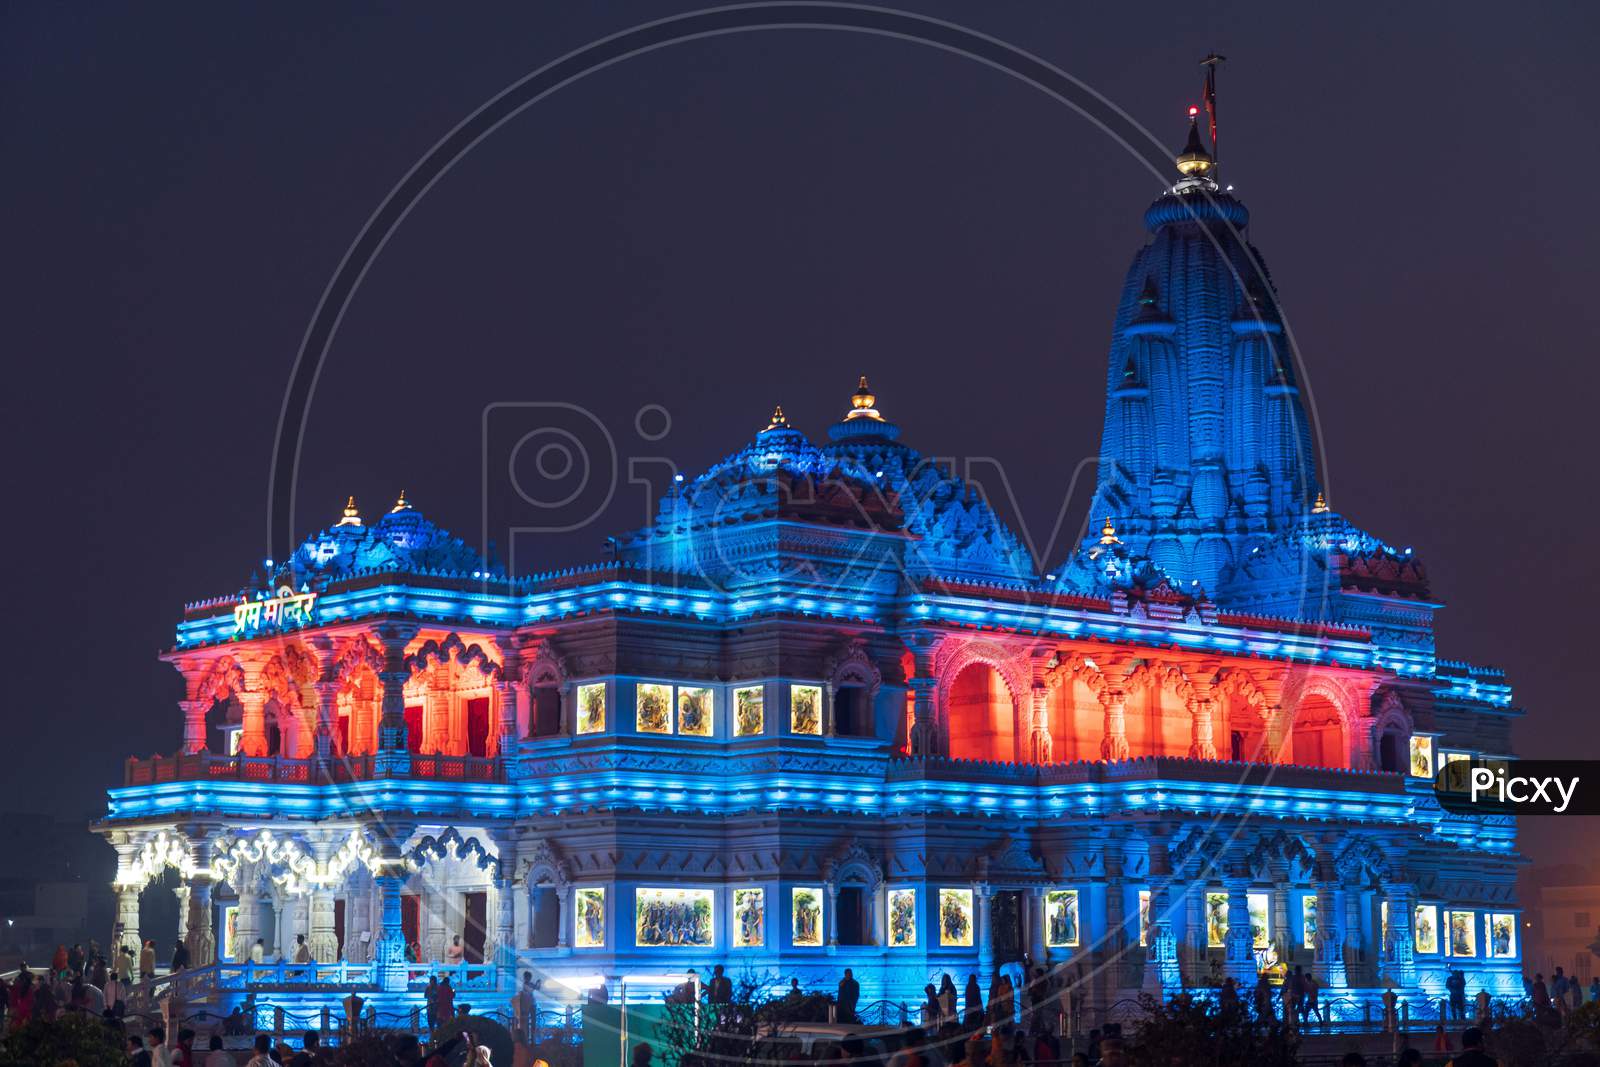 The awesome beautiful Prem Mandir (Temple of love) with lighting  in Vrindavan Mathura of India.